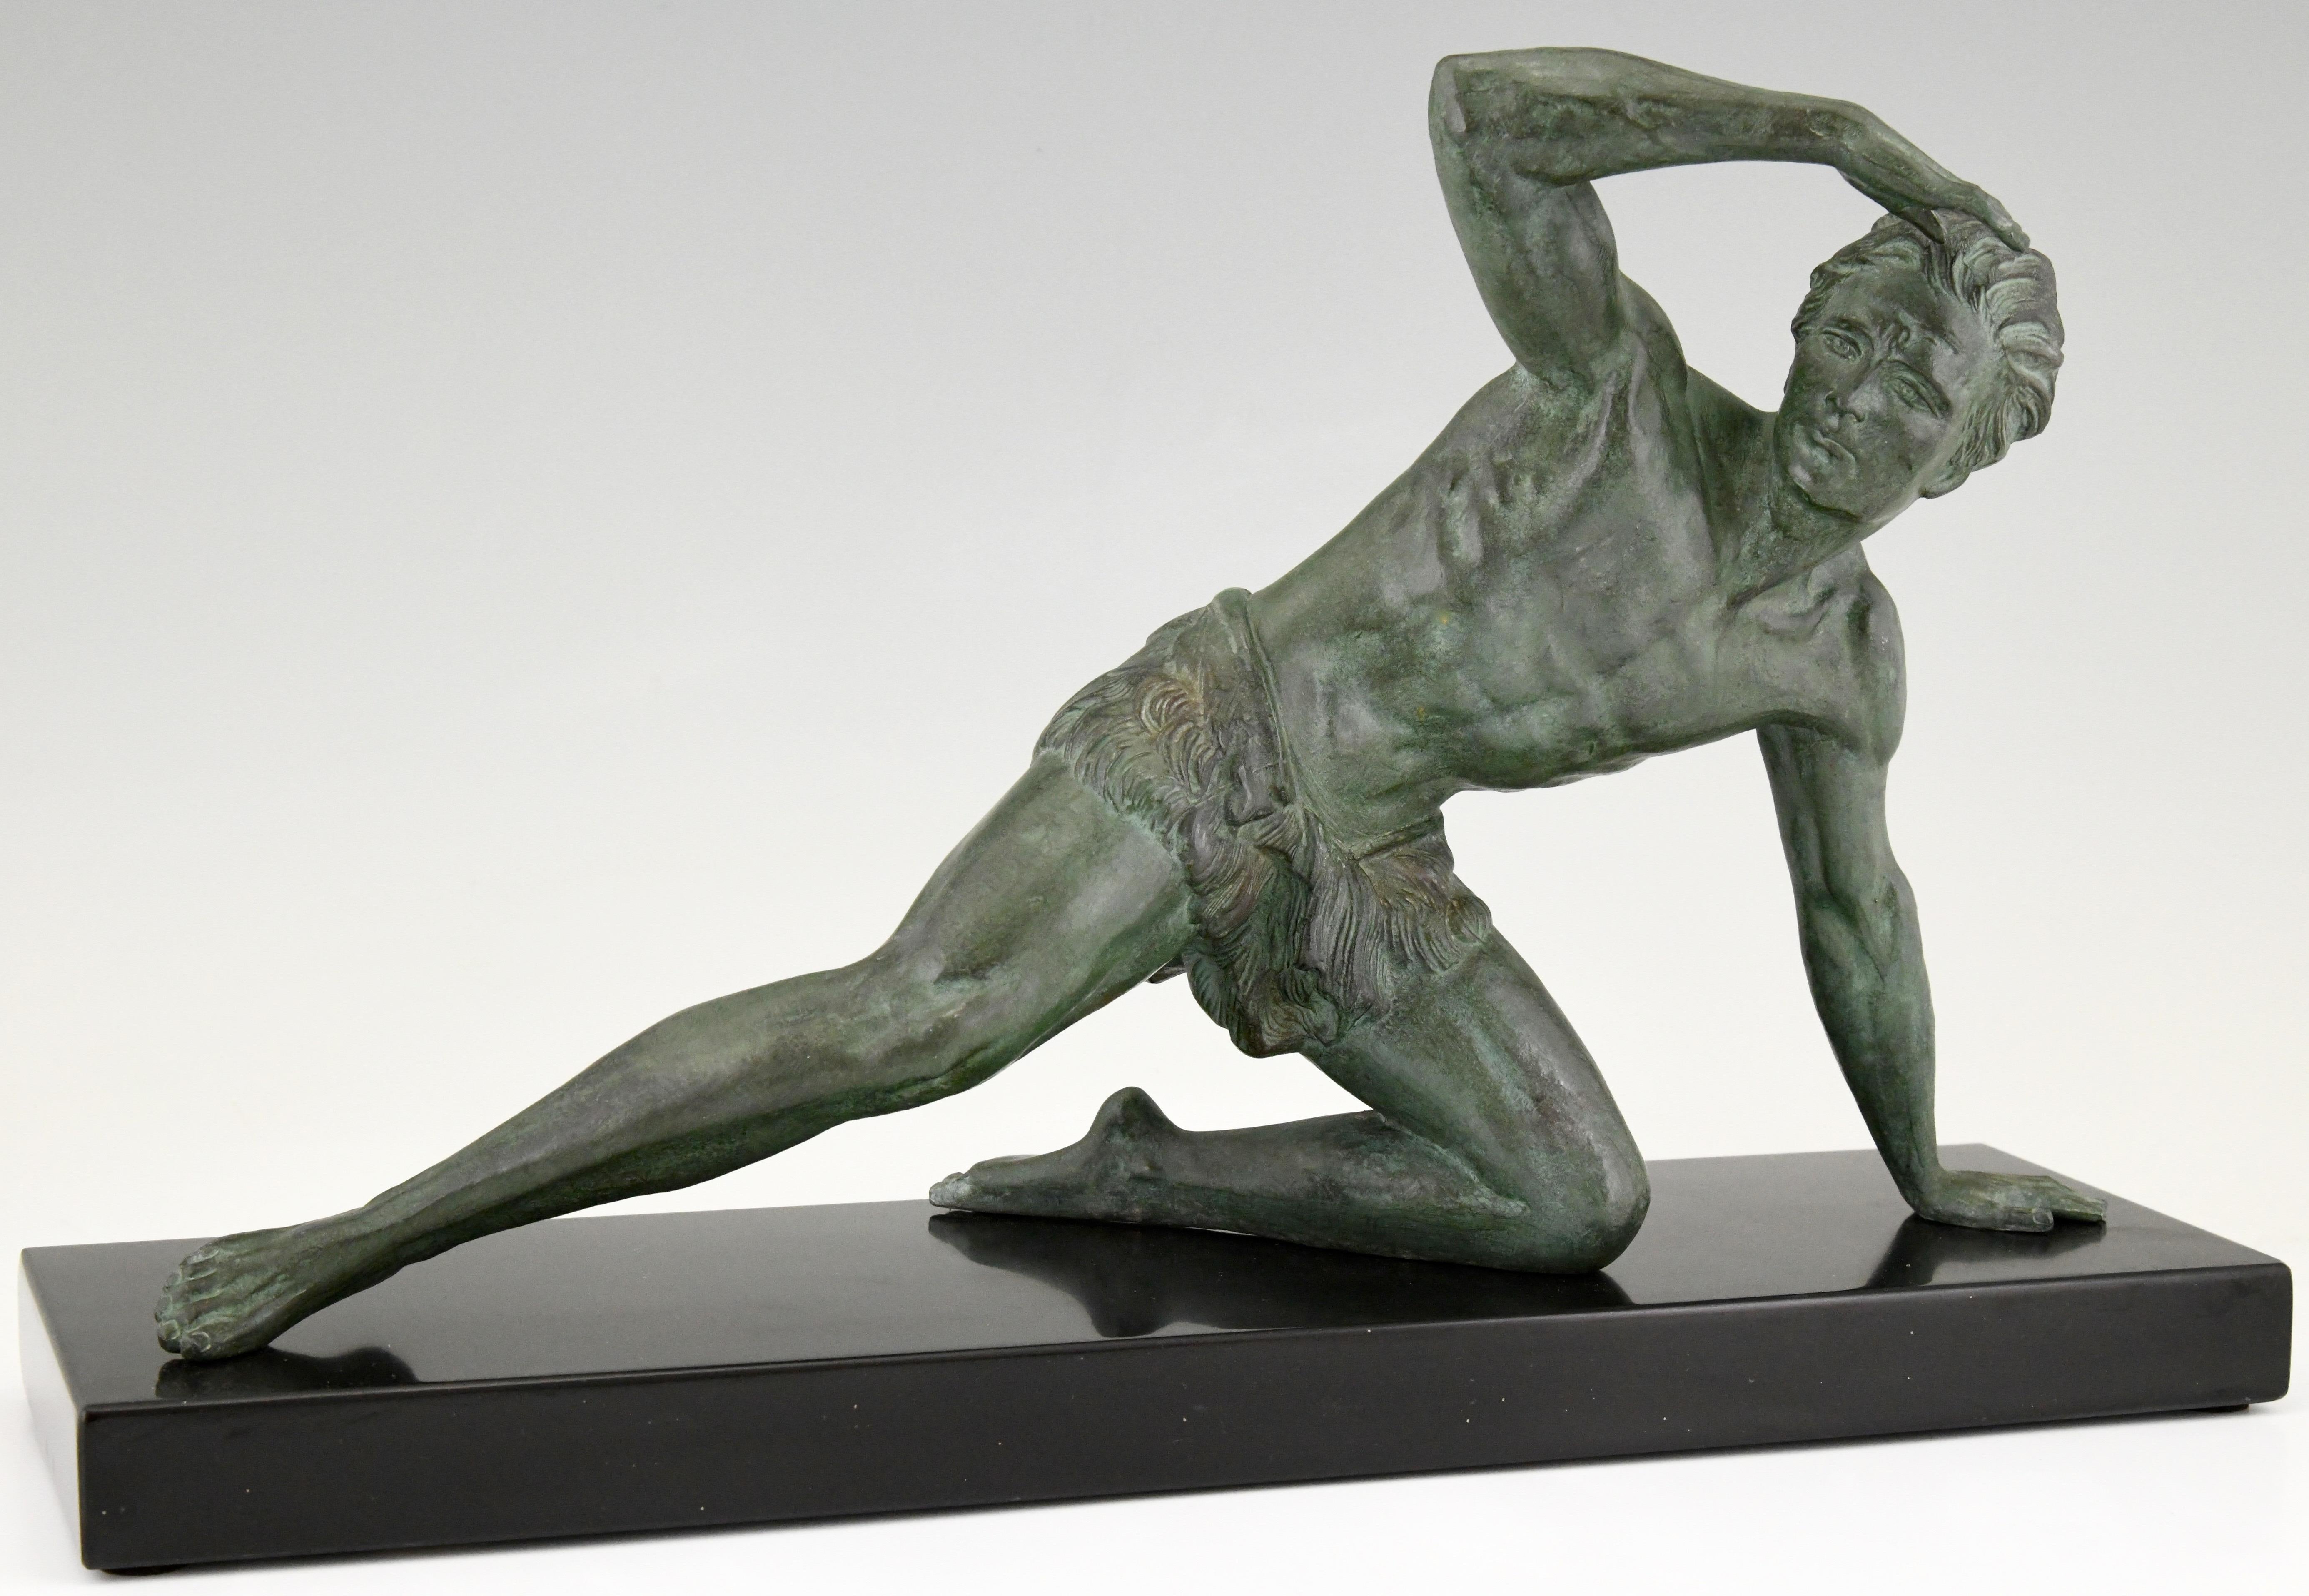 Art Deco sculpture of a man on the lookout by Jean de Roncourt, France, ca. 1930.
The sculpture has a beautiful green patina with lighter shades and stands on a Belgian black marble plinth.
  